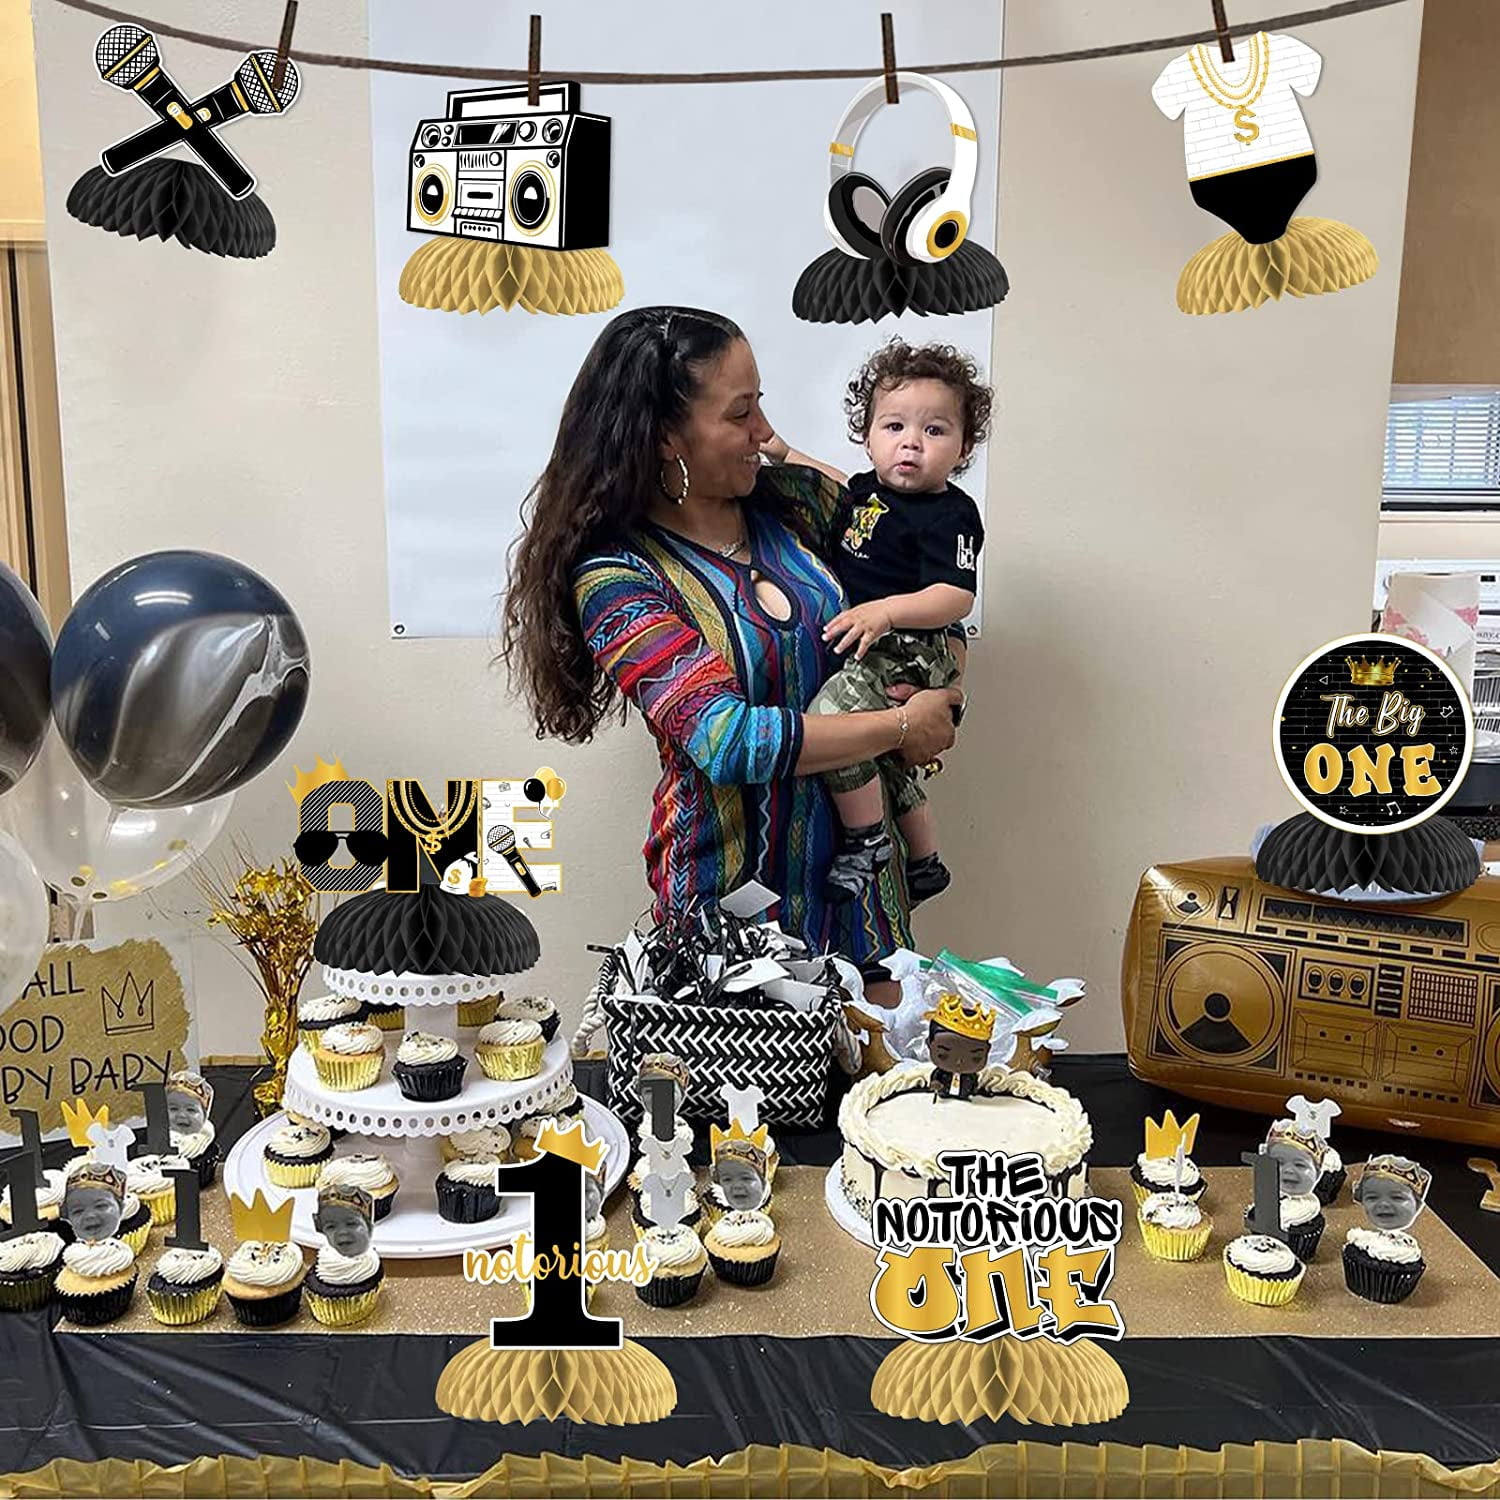 Black and Gold Party Decorations: An Elegant Theme - Modern Mommsie